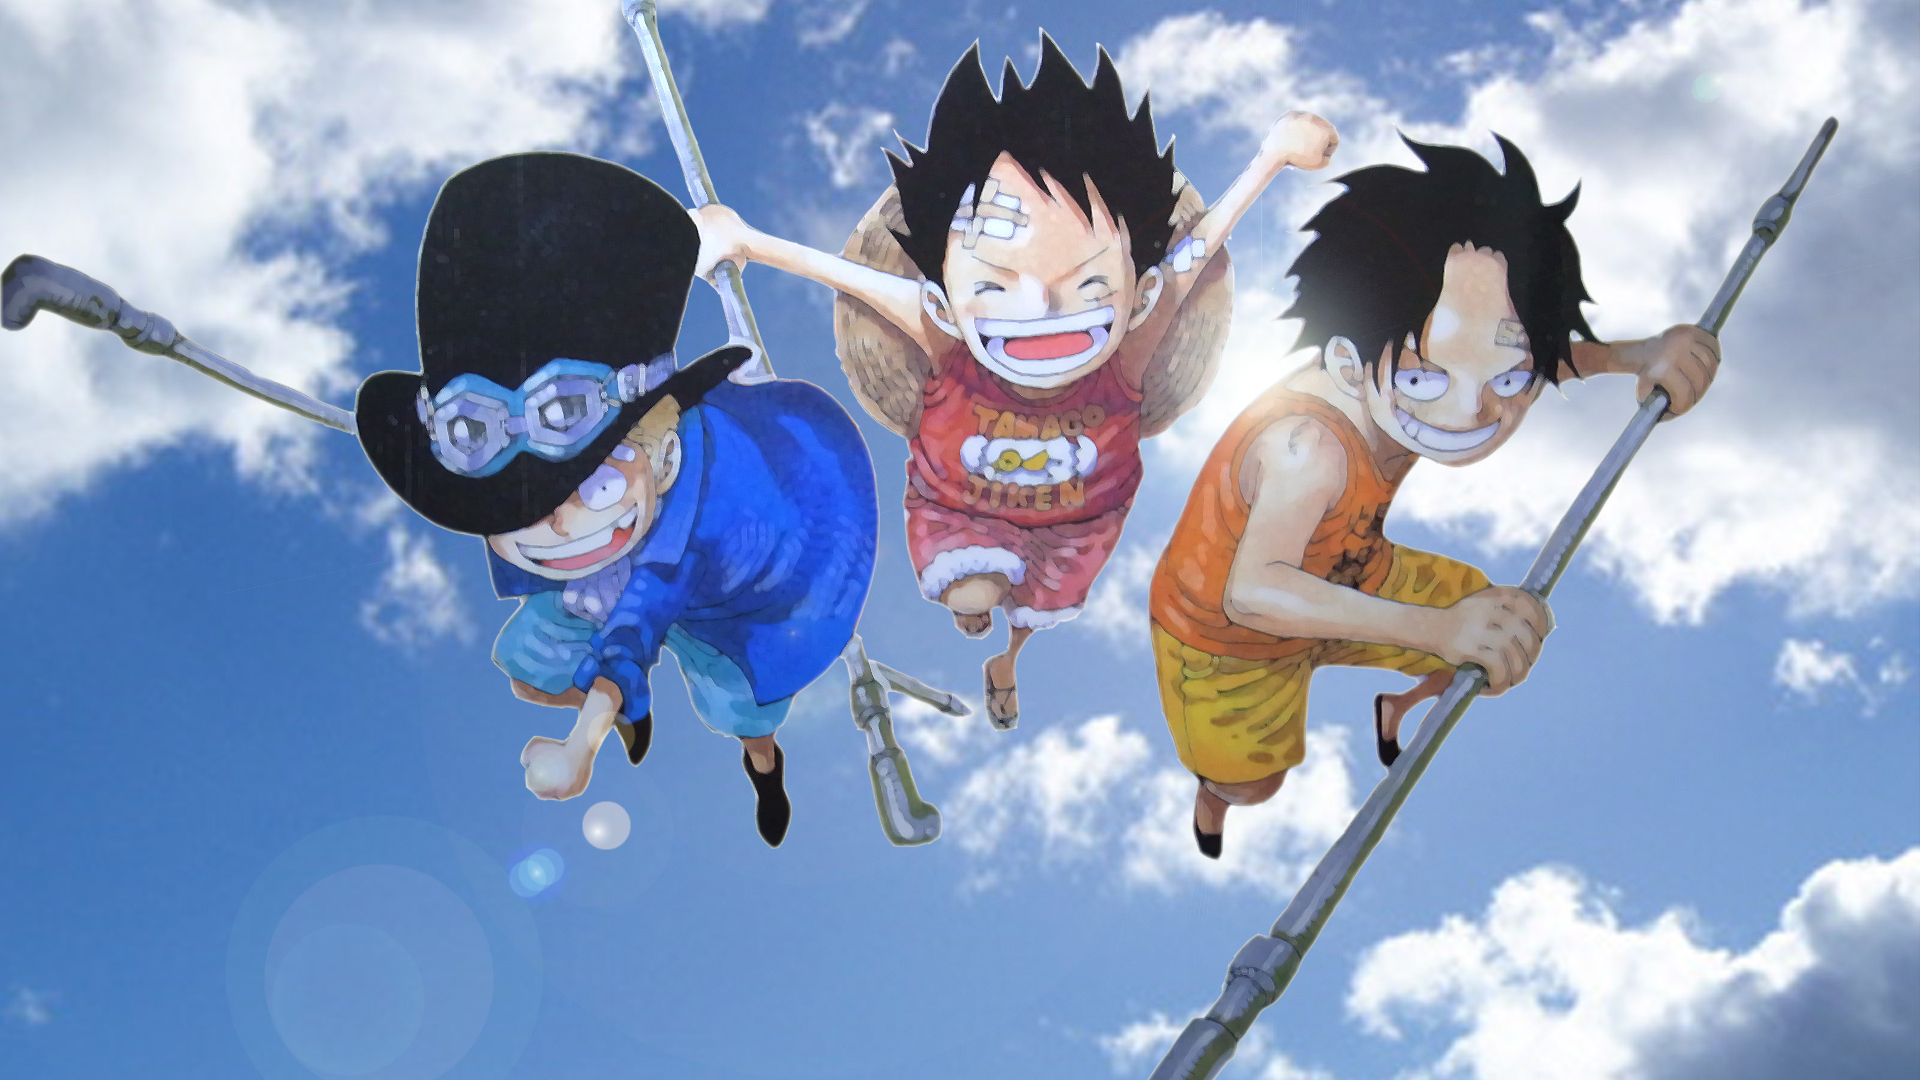 Free download One Piece wallpaper 985921 [1920x1200] for your Desktop, Mobile & Tablet. Explore One Piece 480x800 Wallpaper. One Piece 480x800 Wallpaper, One Piece Wallpaper, One Piece Wallpaper